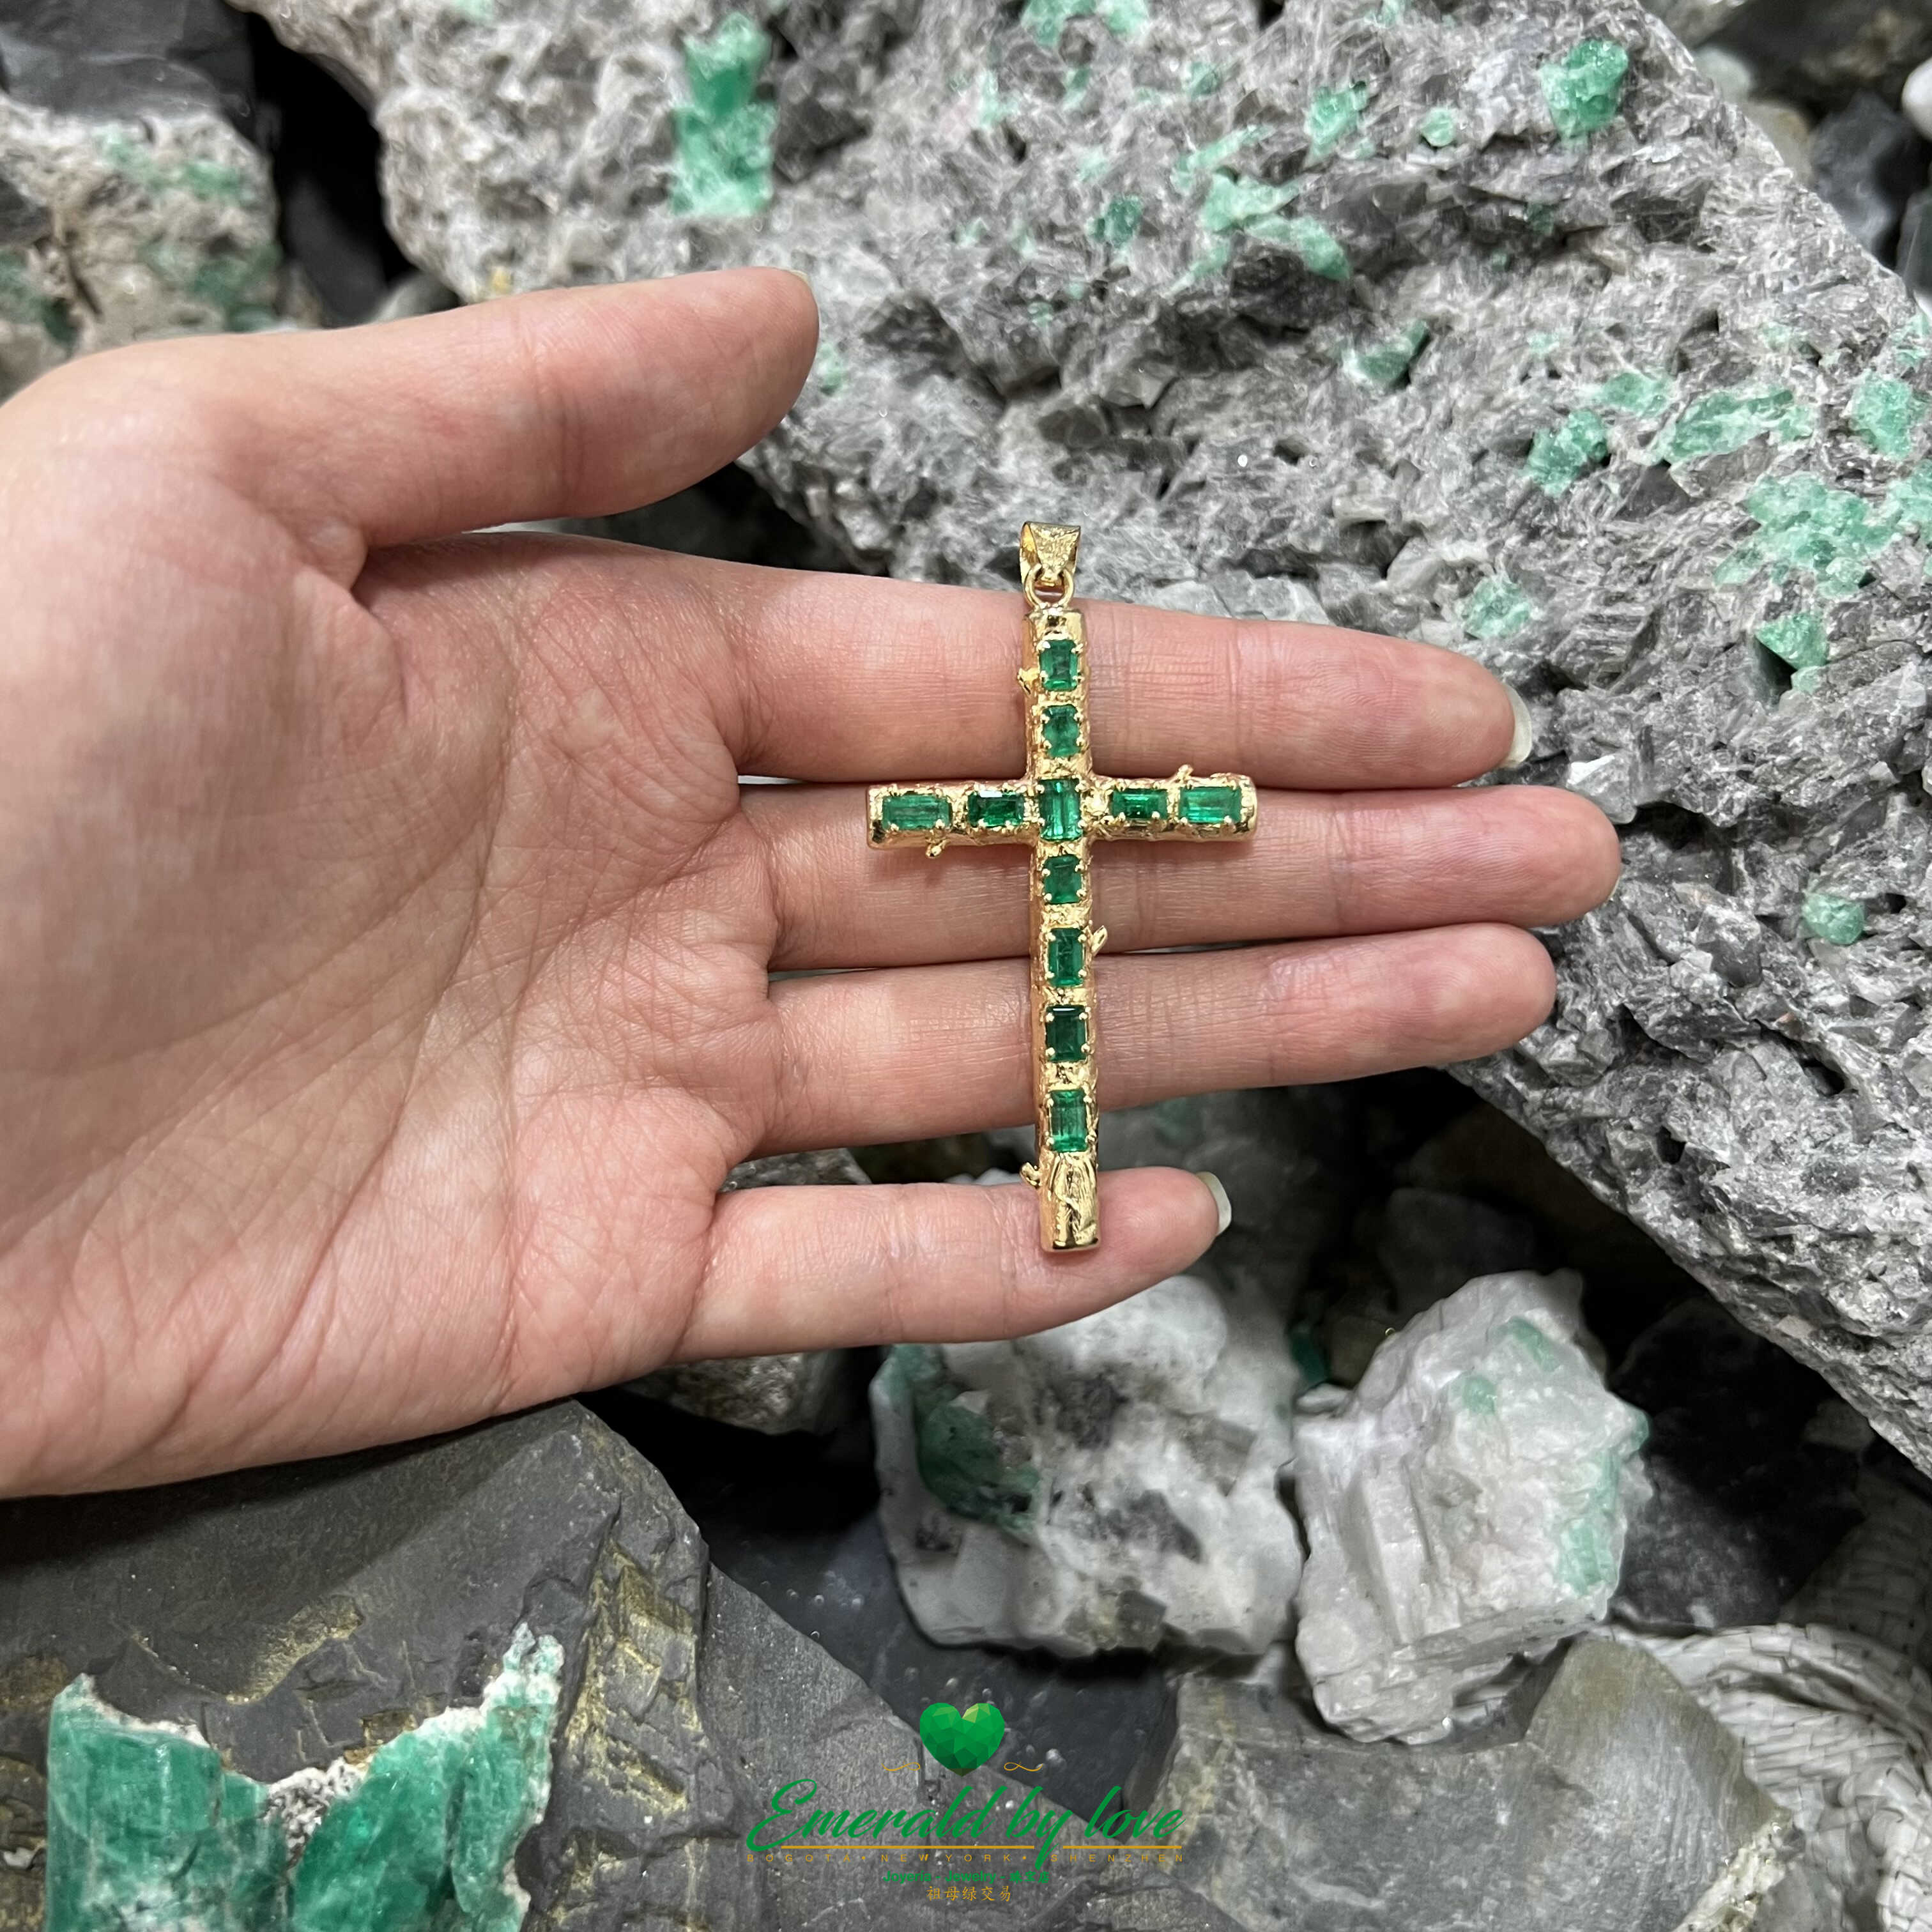 Yellow Gold Trunk Cross Pendant with Square-Cut Emeralds - A Masterpiece of Timeless Craftsmanship